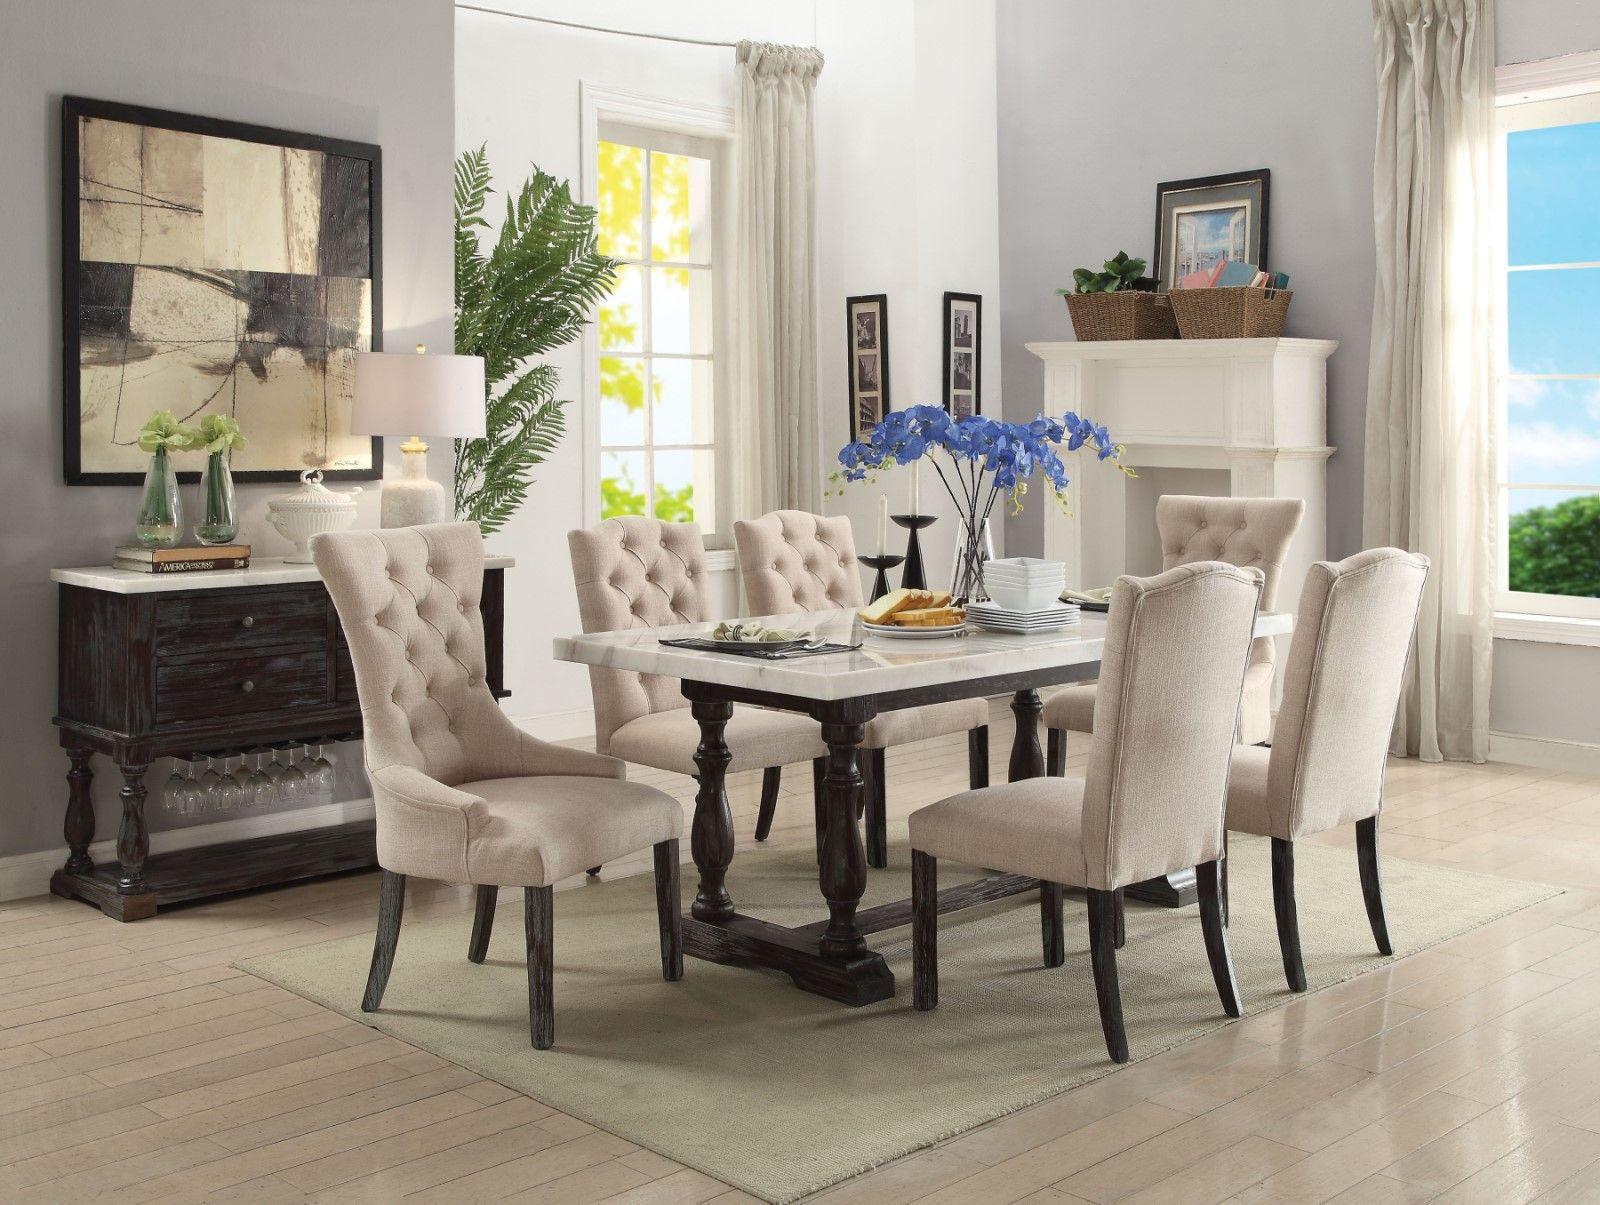 

    
Rustic White Marble & Espresso Dining Table Set & Chairs by Acme Gerardo 60820-9pcs
